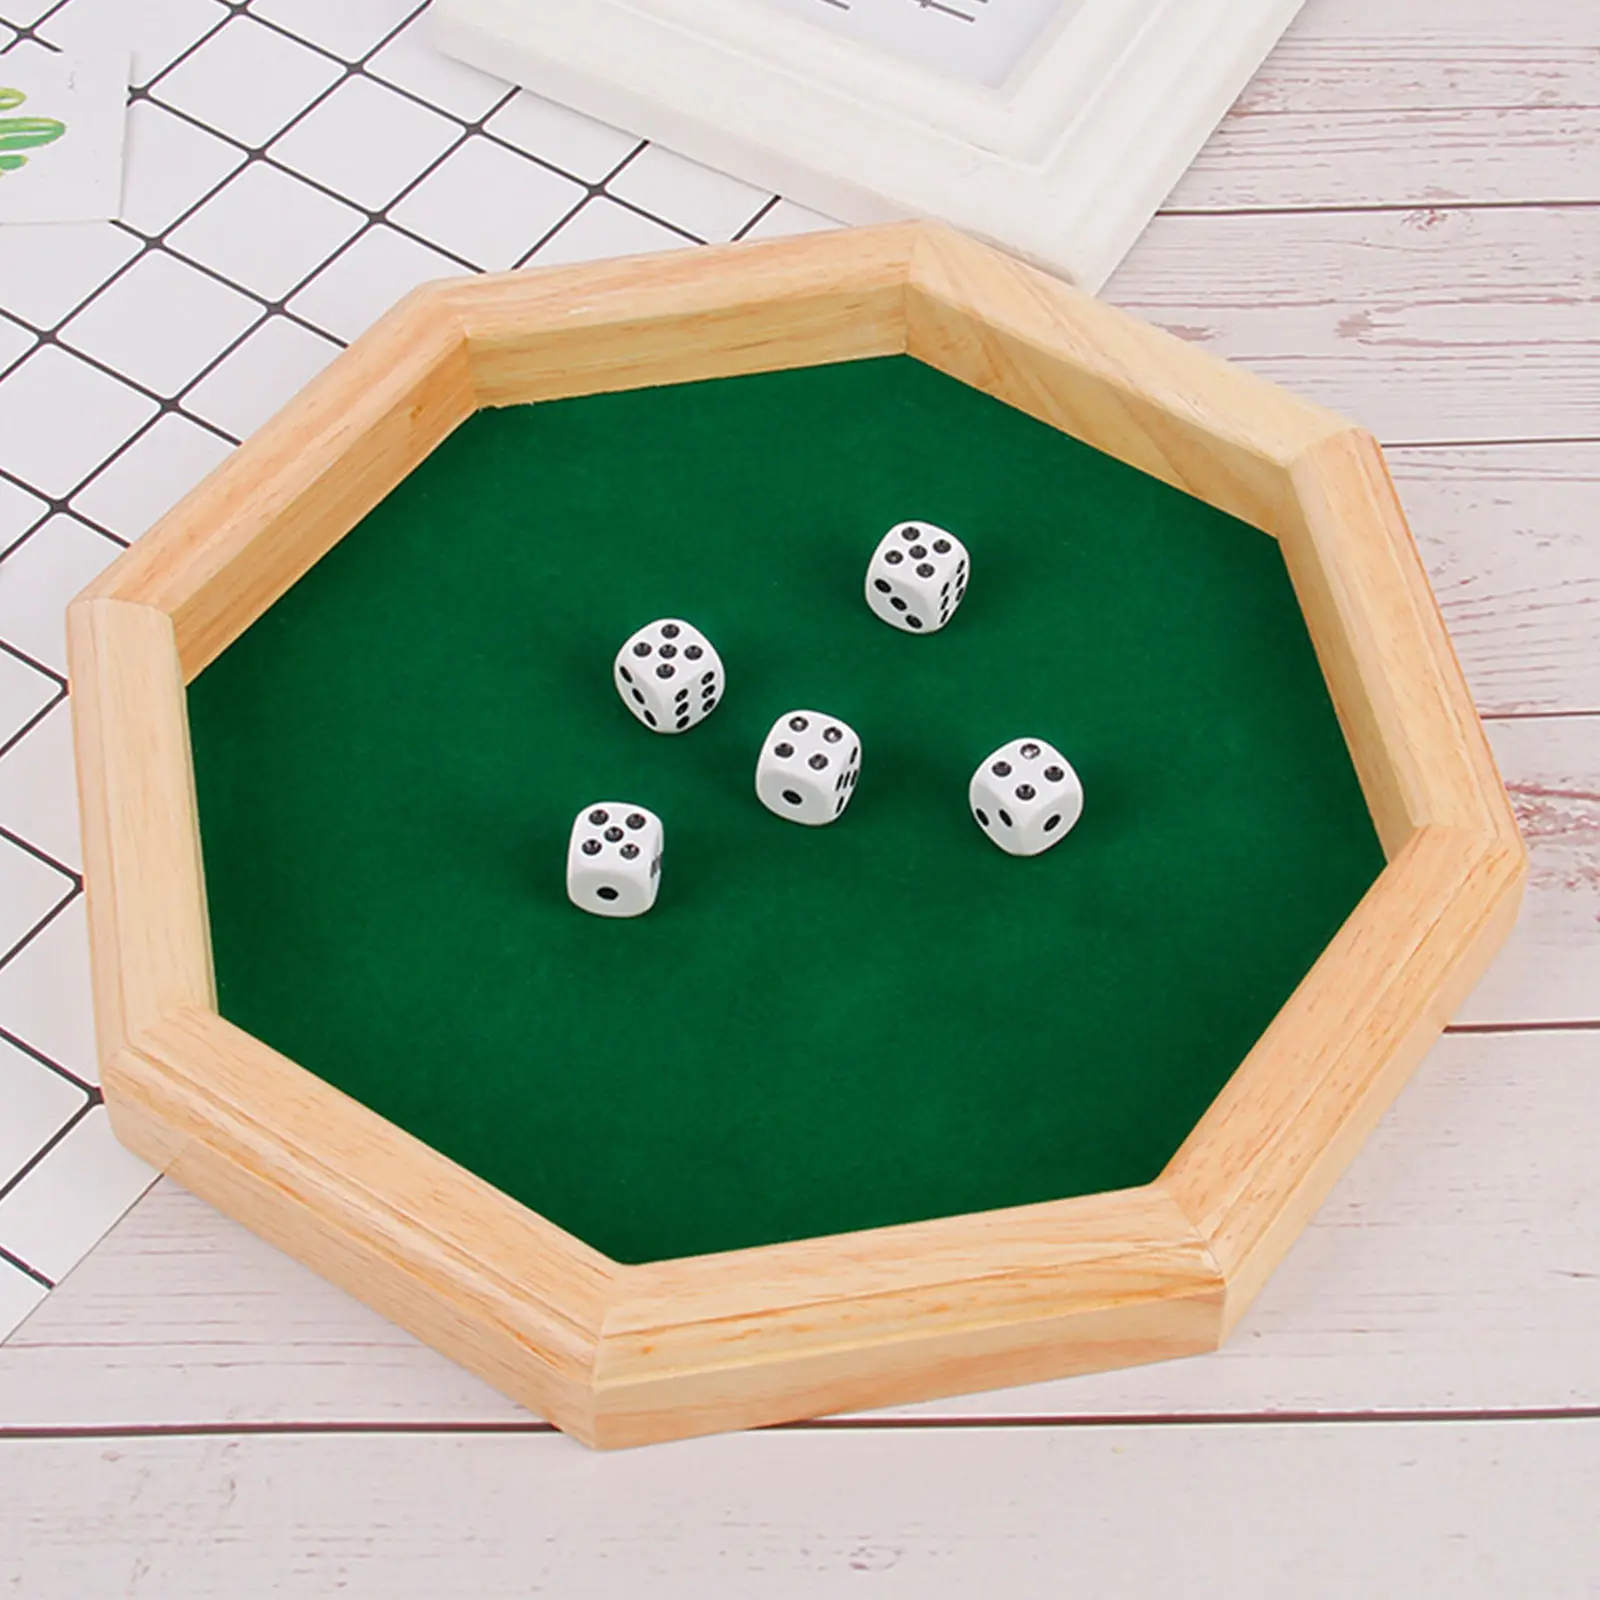 Heavy Duty 12 Inch Octagonal Wooden Dice Tray with Felt Lined Rolling Surface, Wooden Dice Rolling Tray for Family Game Night